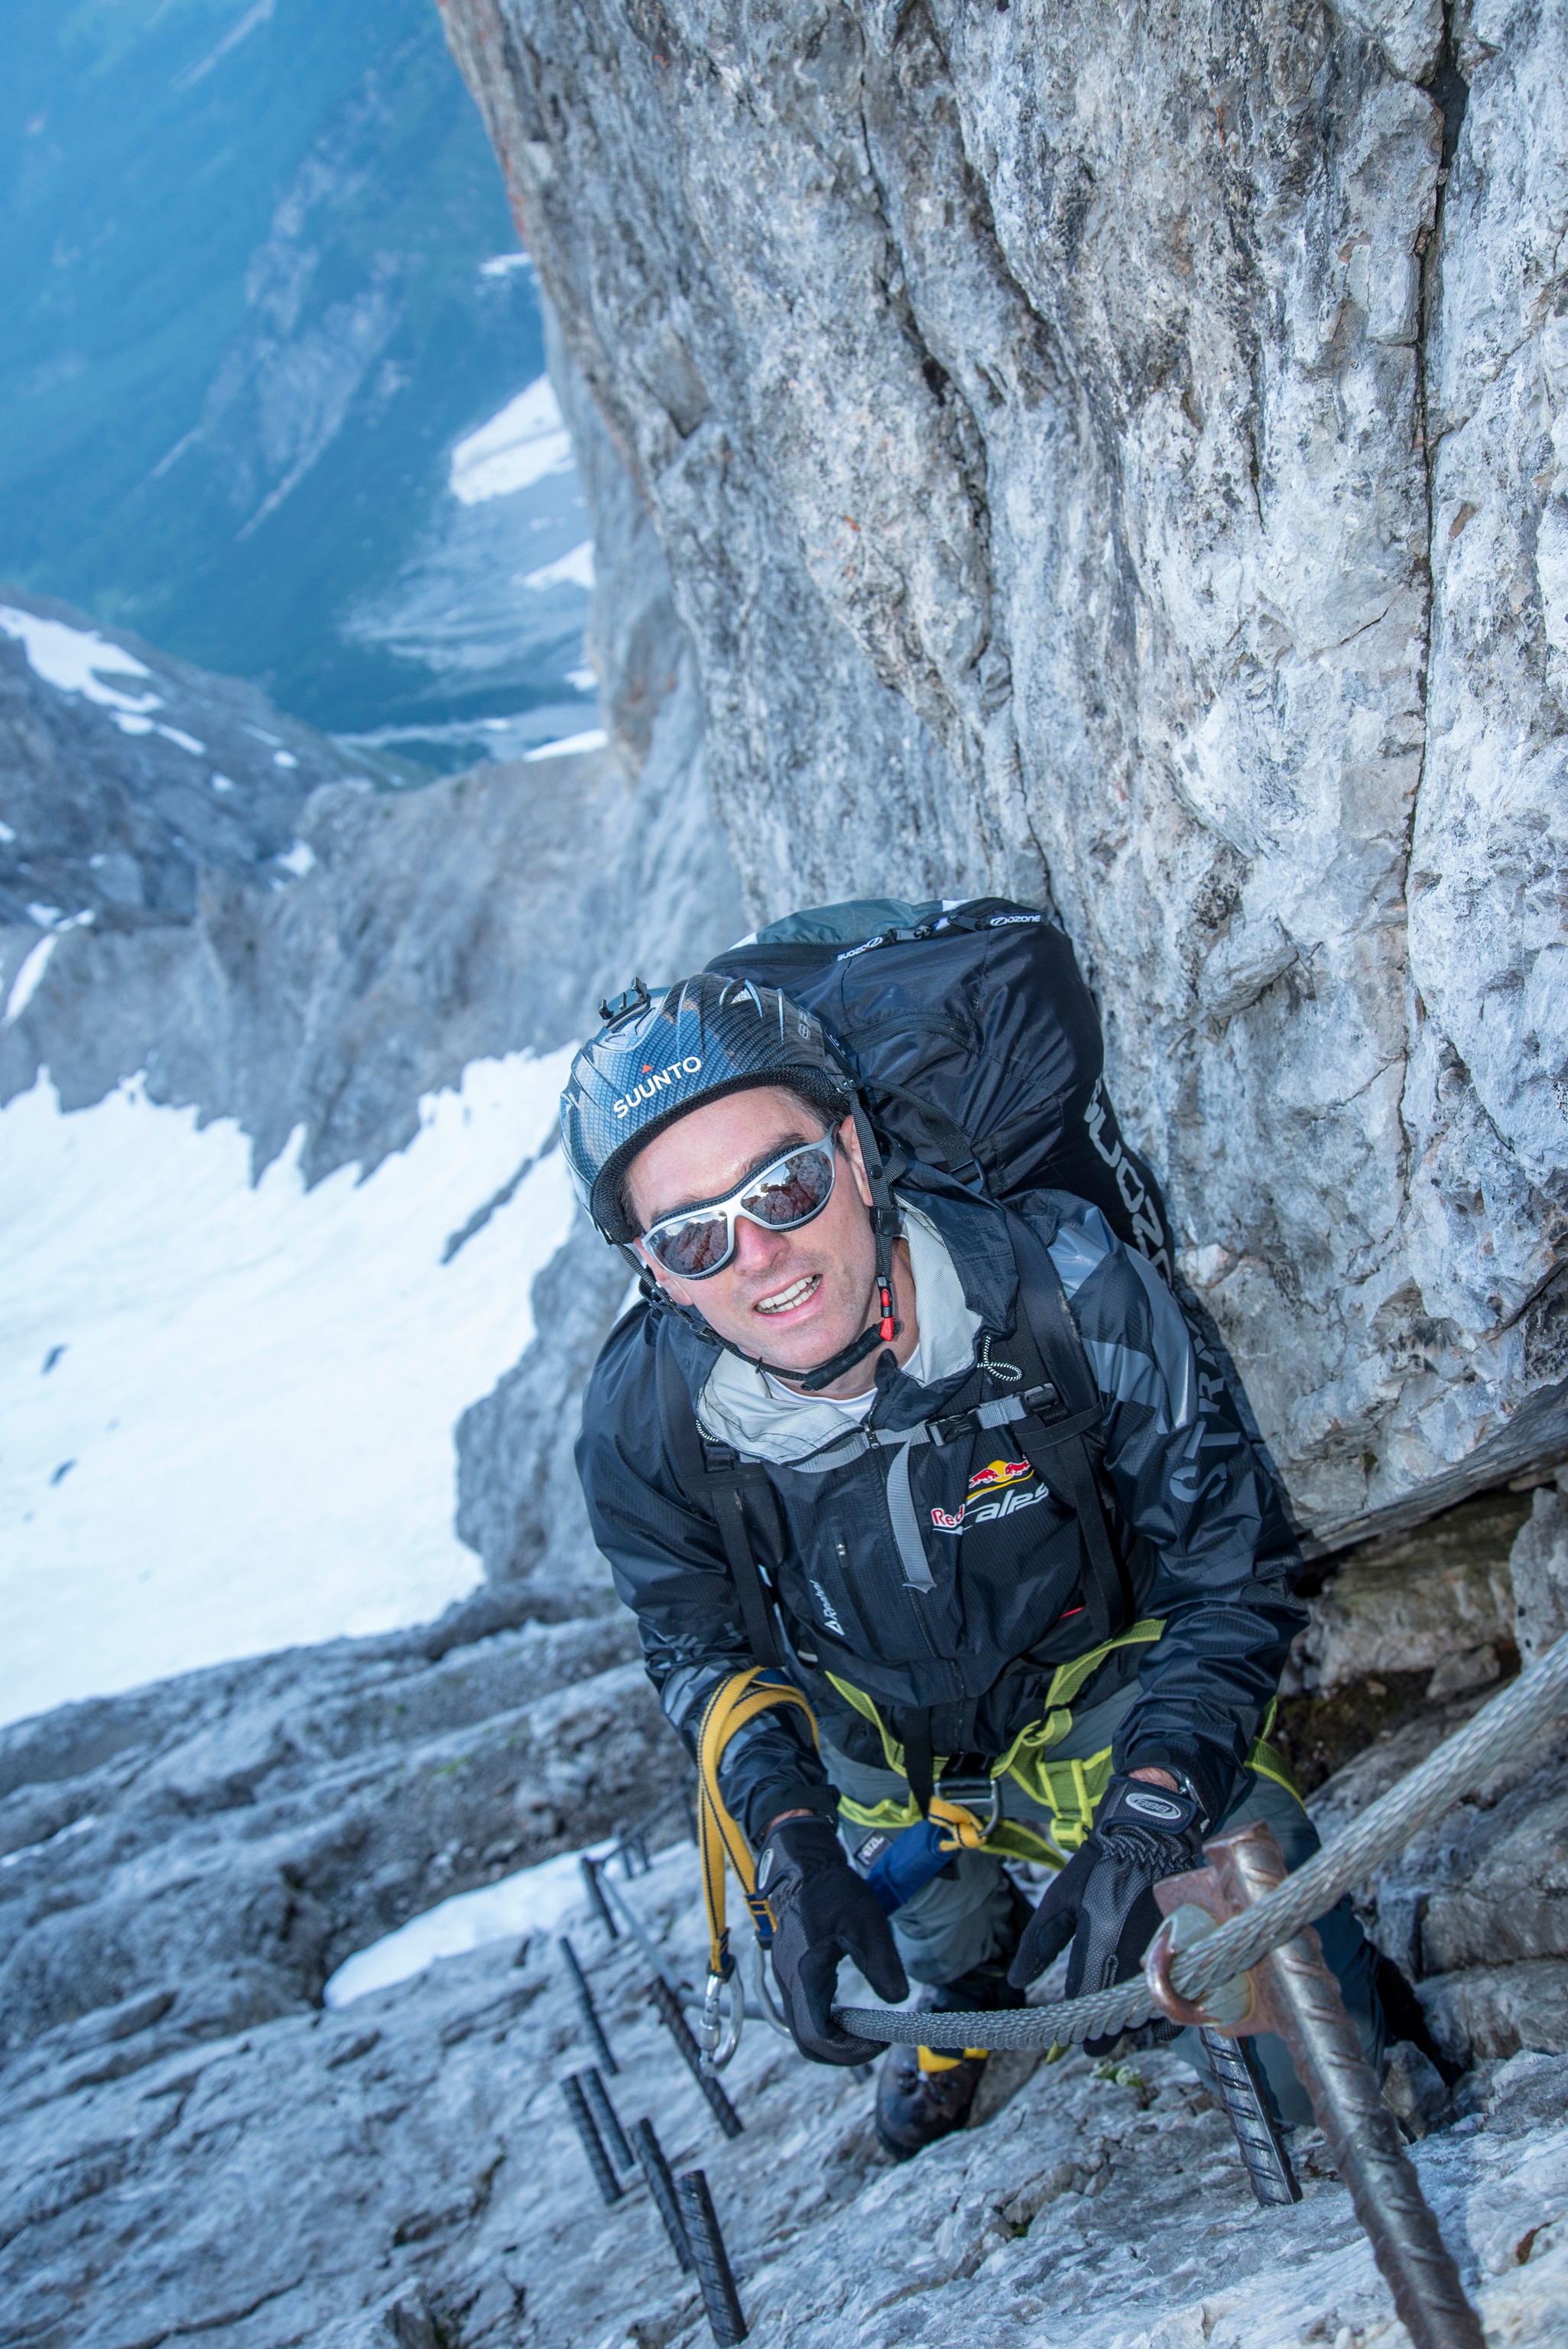 Jon Chambers (GBR) hikes at the Red Bull X-Alps at Dachstein in Ramsau, Austria on July 8th, 2013